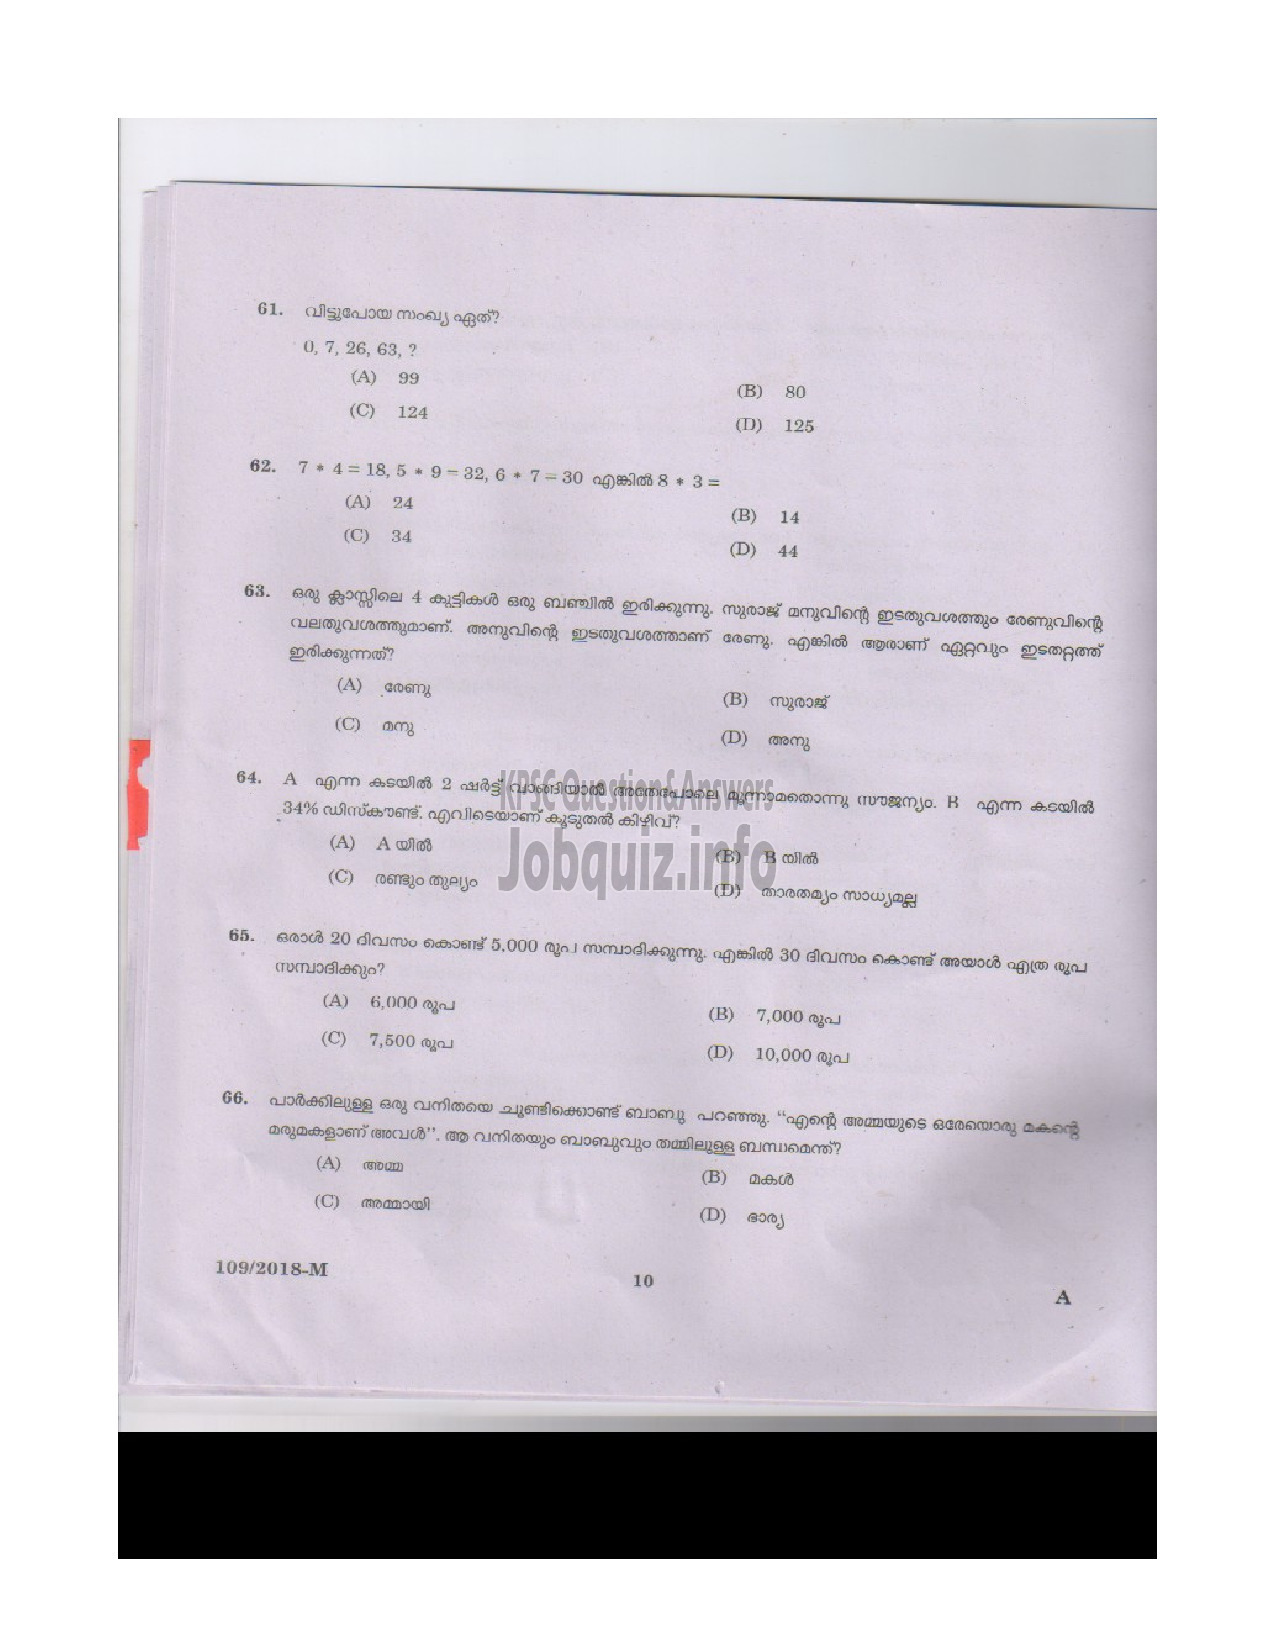 Kerala PSC Question Paper - ATTENDER GR II LIGHT KEEPER SIGNALLER CLERICAL ATTENDER FEMALE ASSISTANT PRISON OFFICER LAB ATTENDER HOMOEOPATHY Malayalam/English -9